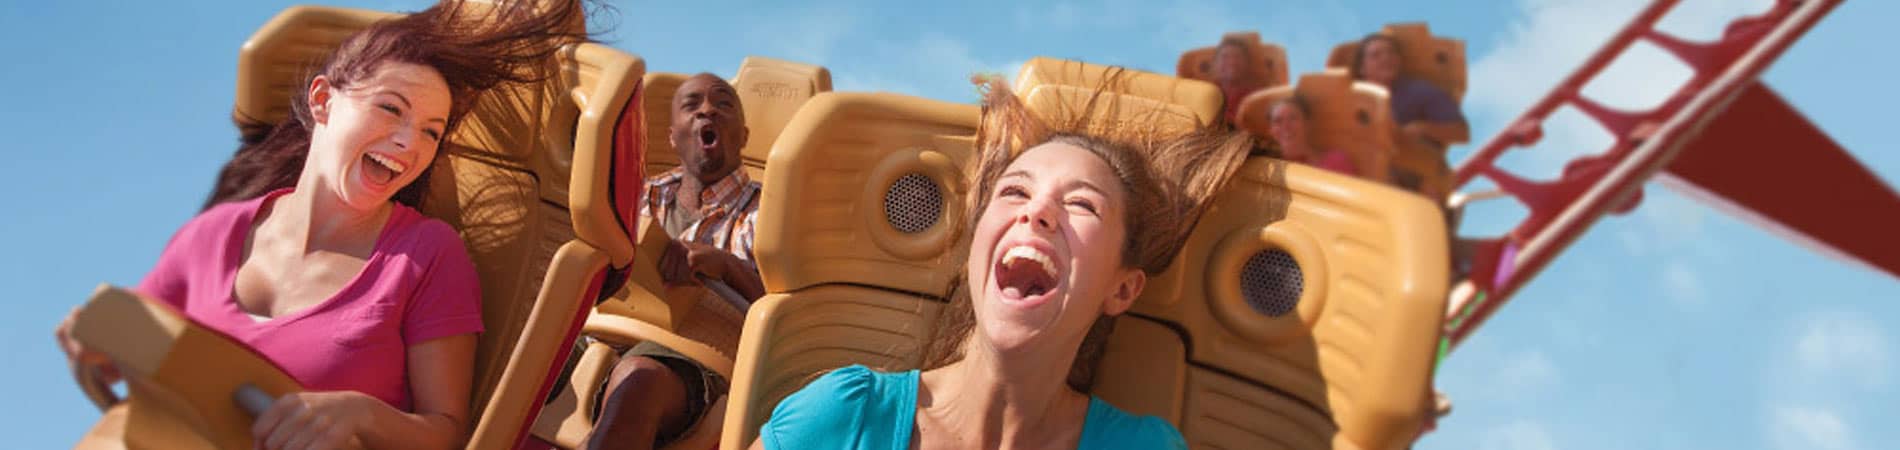 american express universal studios vacation packages